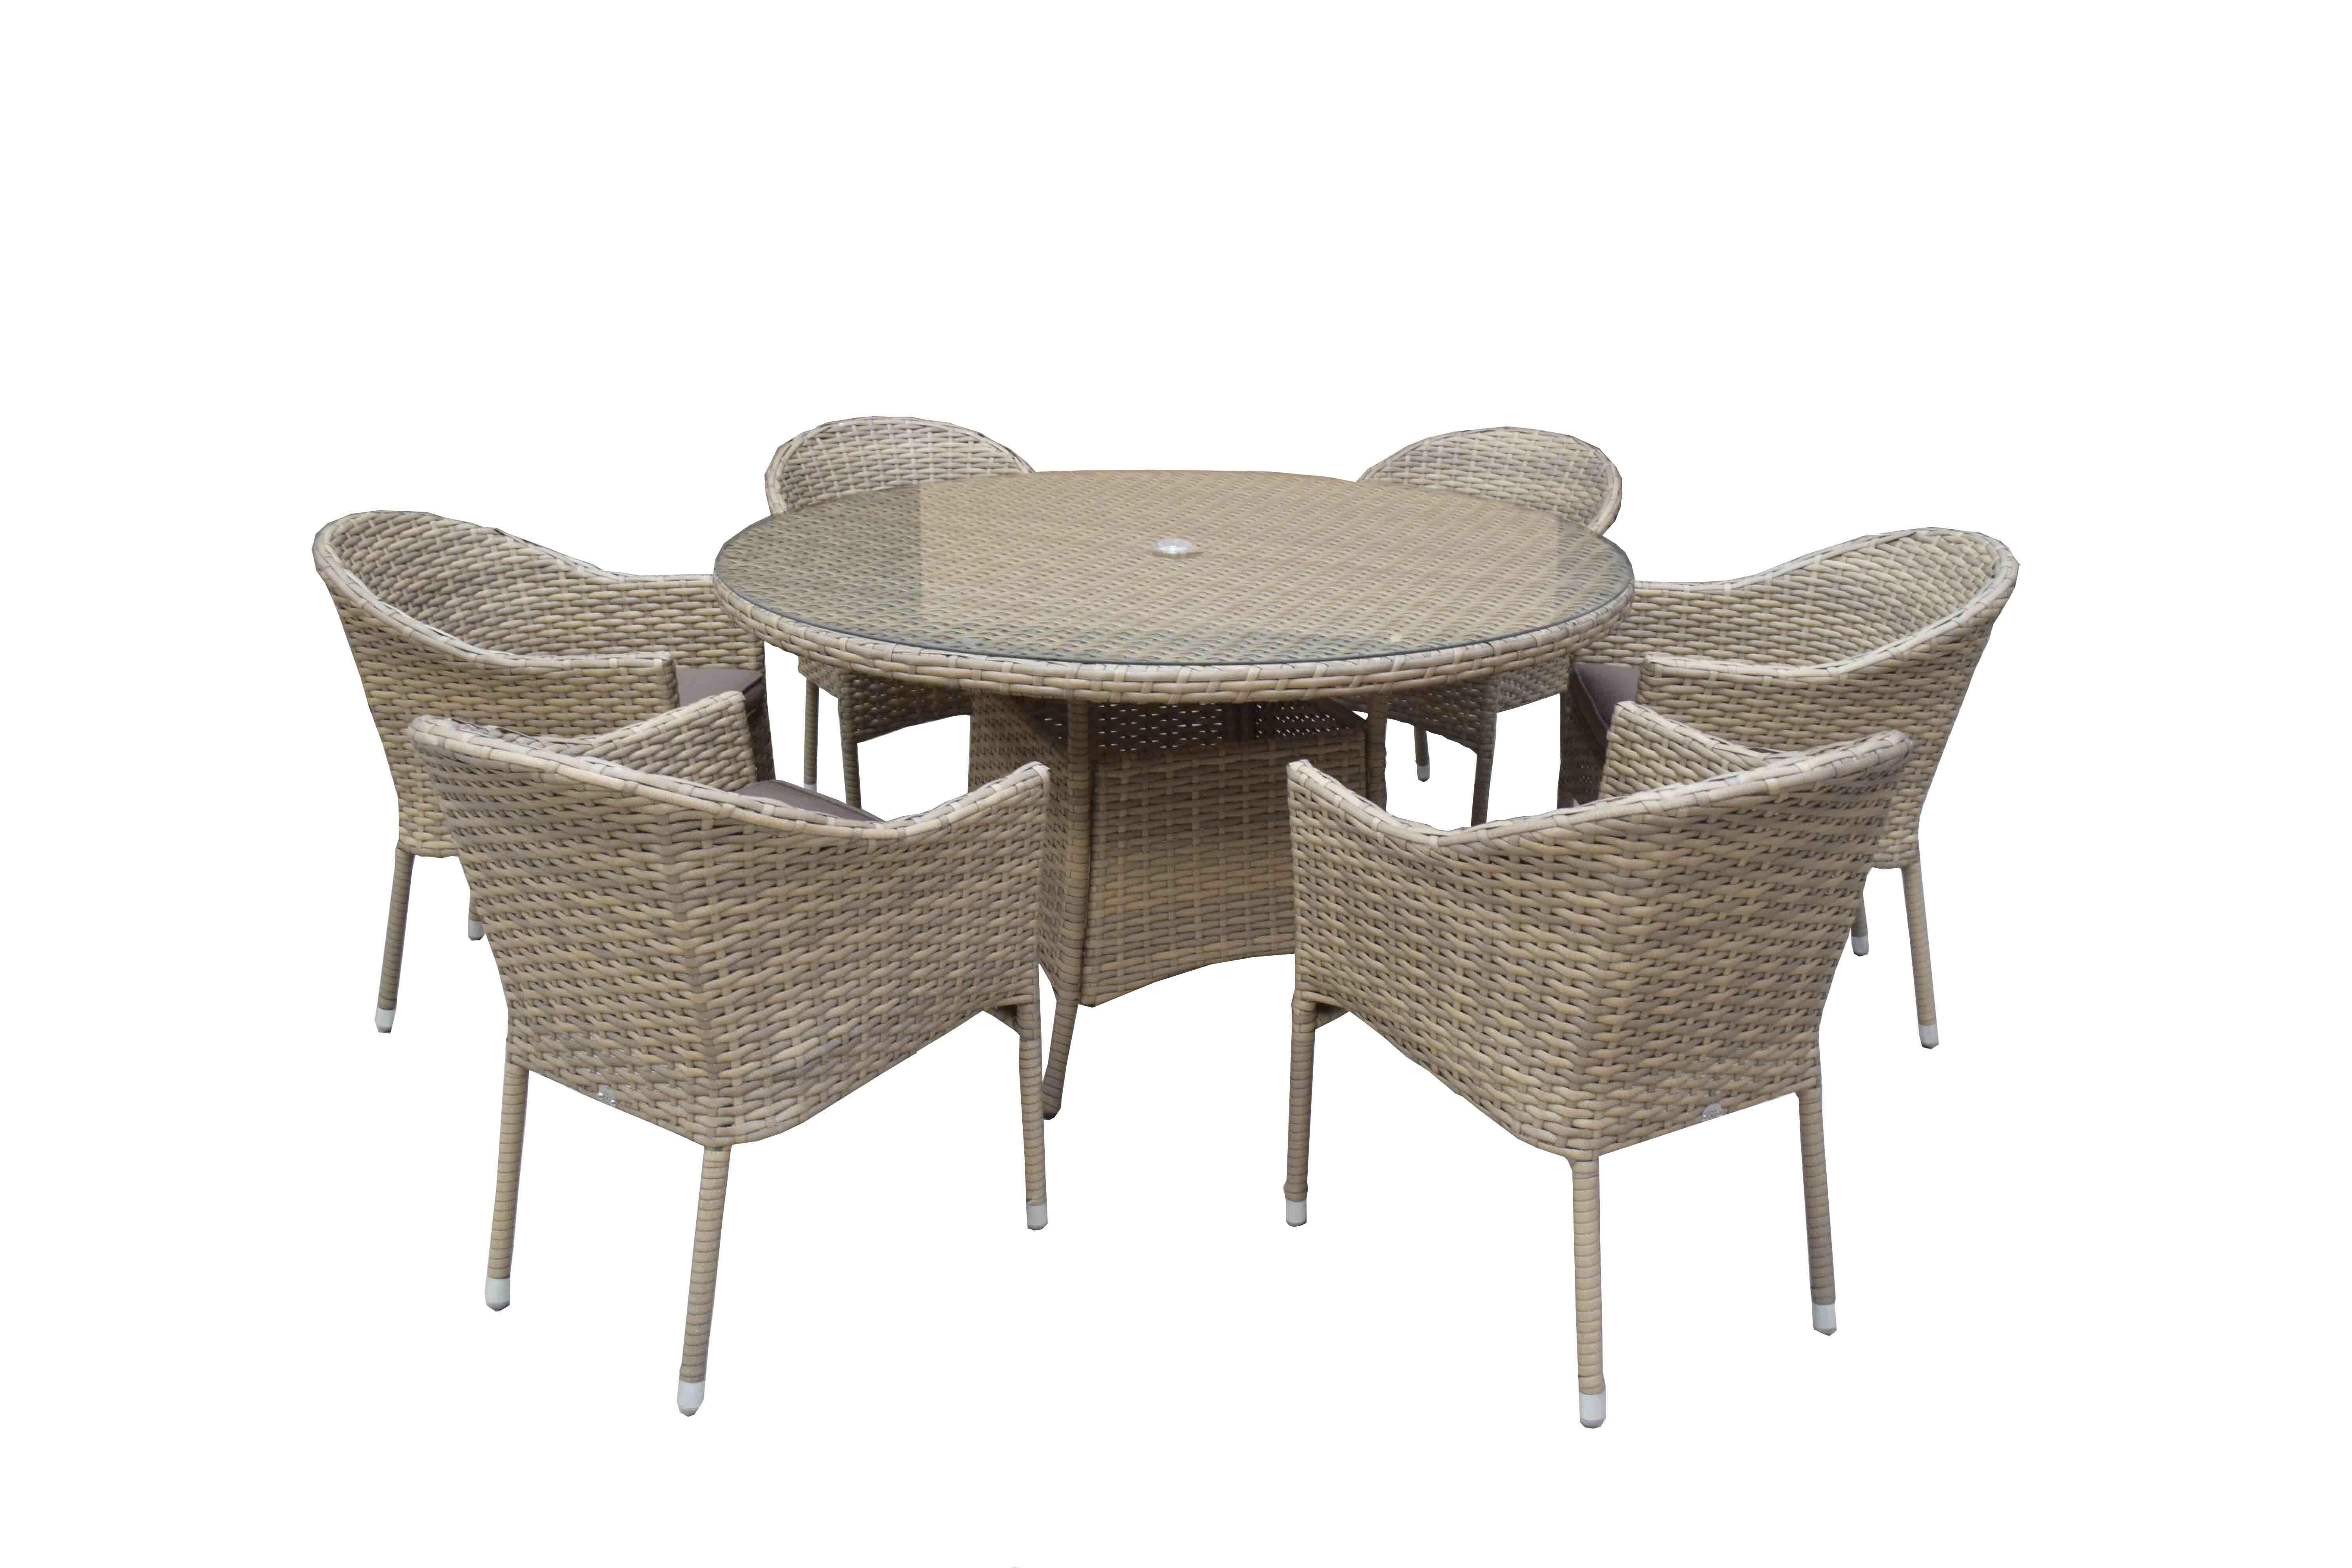 An image of Signature Weave Darcey 6 Seater Round Dining Set Garden Furniture